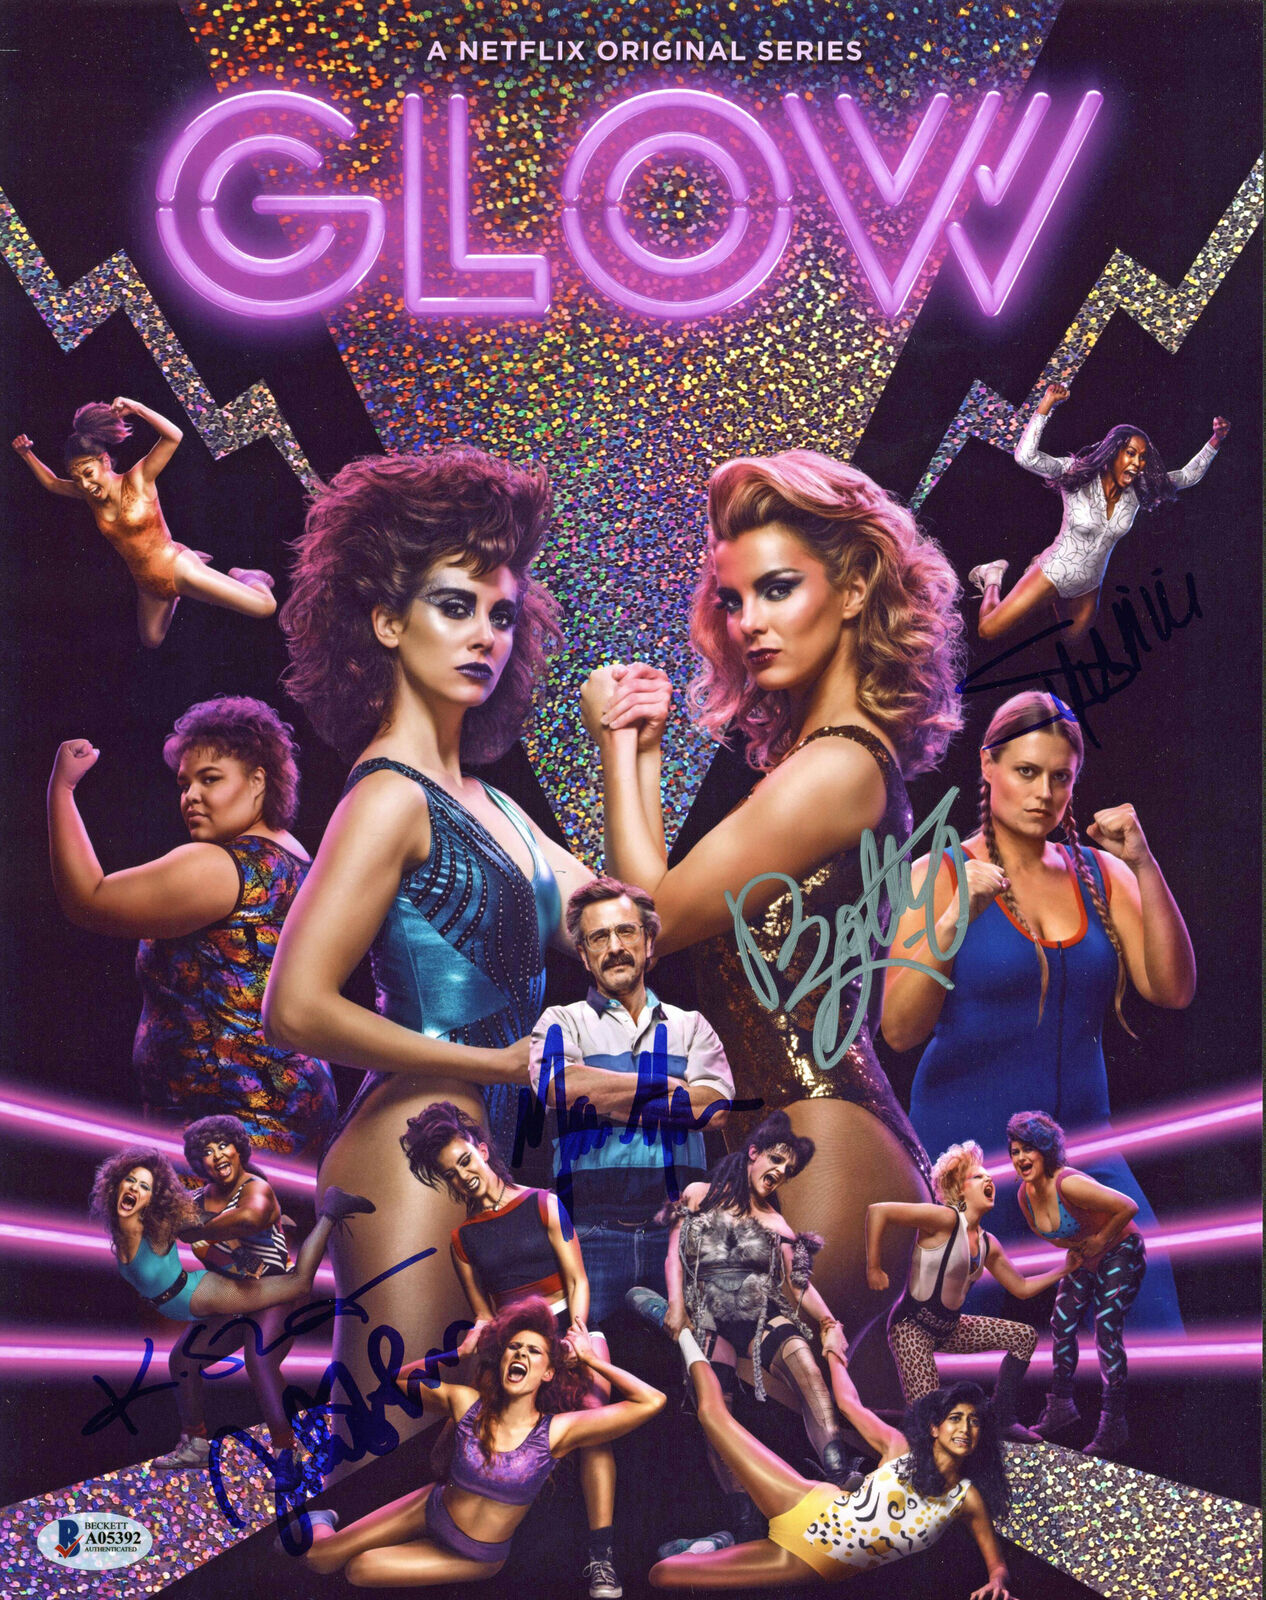 Glow (5) Maron, Stevens, Gilpin, Noel & Tohn Signed 11x14 Photo Poster painting BAS #A05392